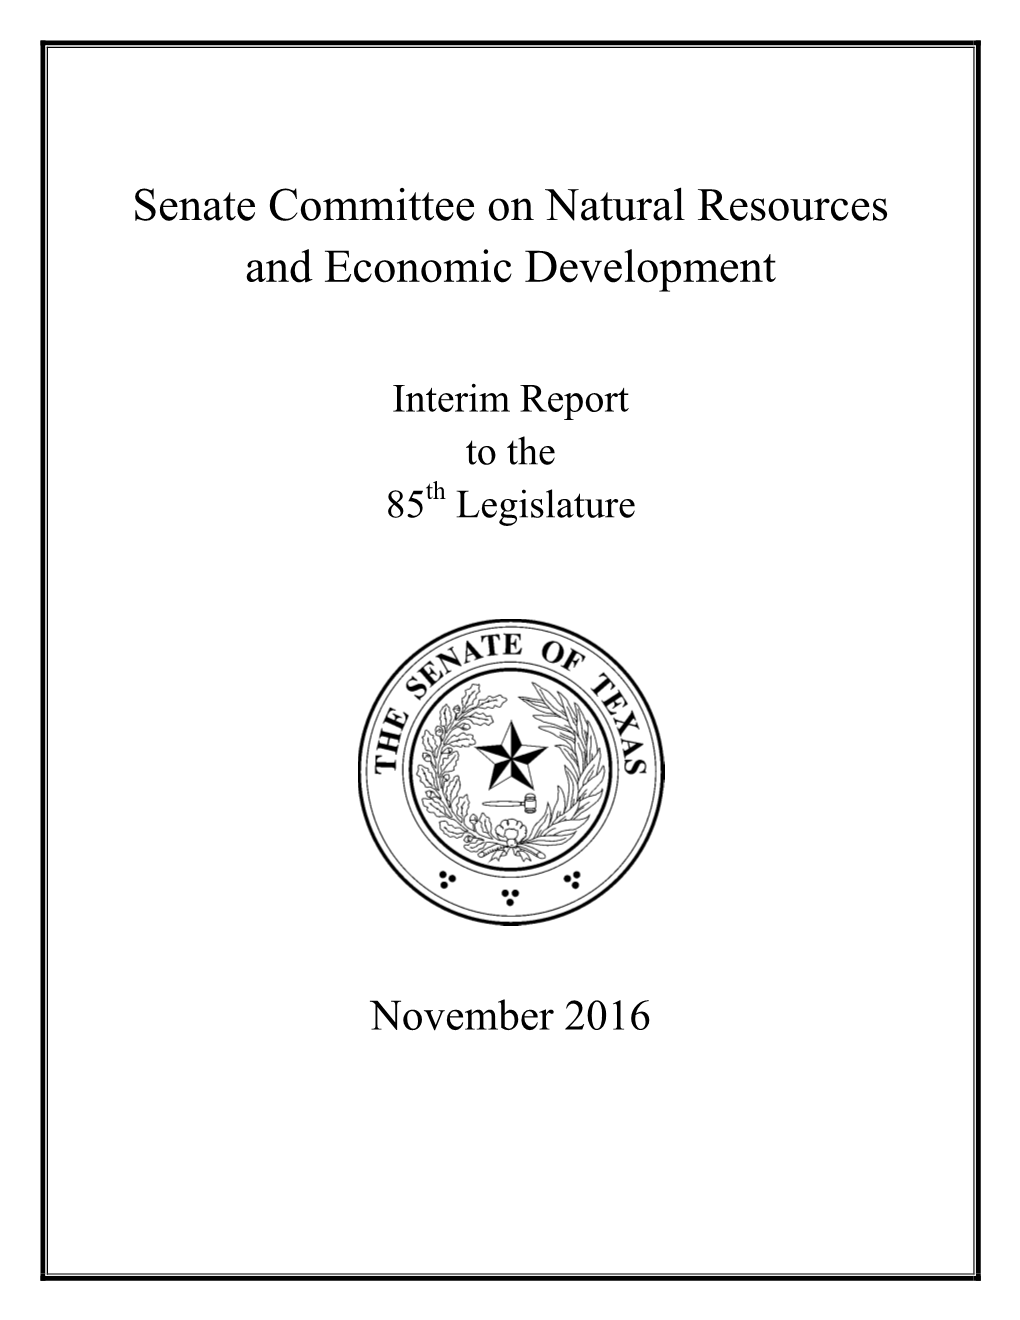 Senate Committee on Natural Resources and Economic Development